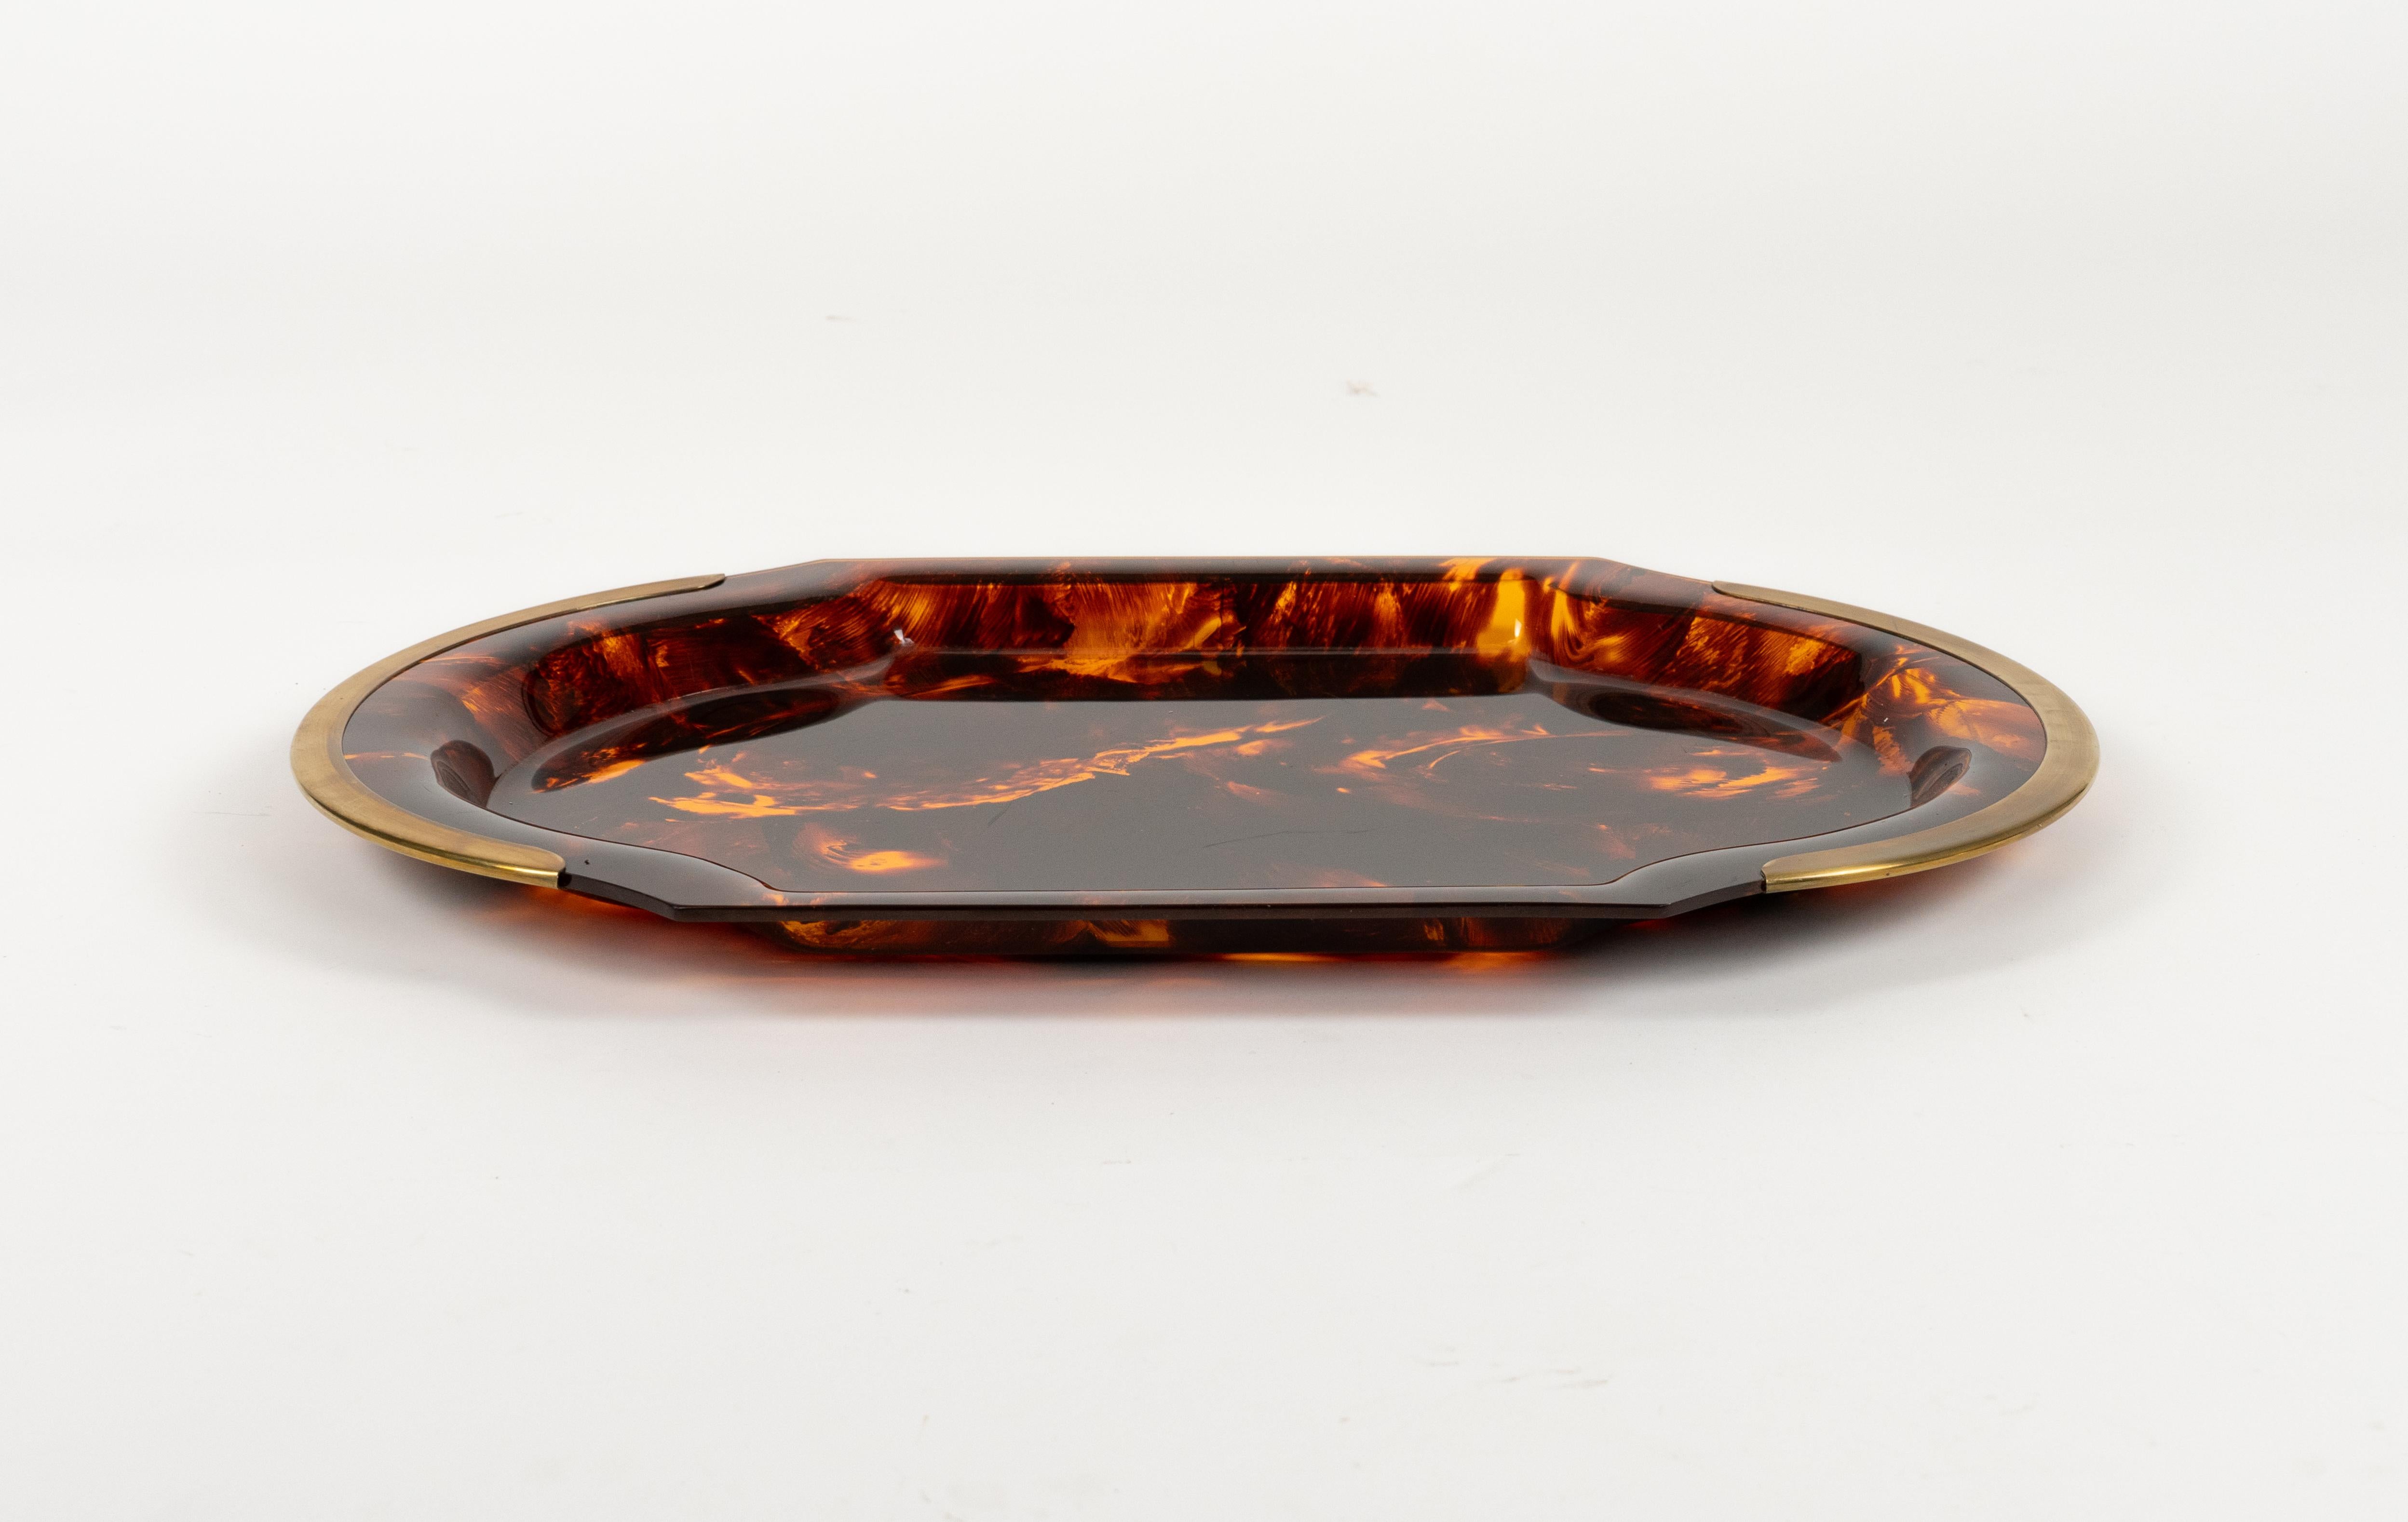 Mid-Century Modern Serving Tray in Effect Tortoiseshell Lucite & Brass by Guzzini, Italy 1970s For Sale